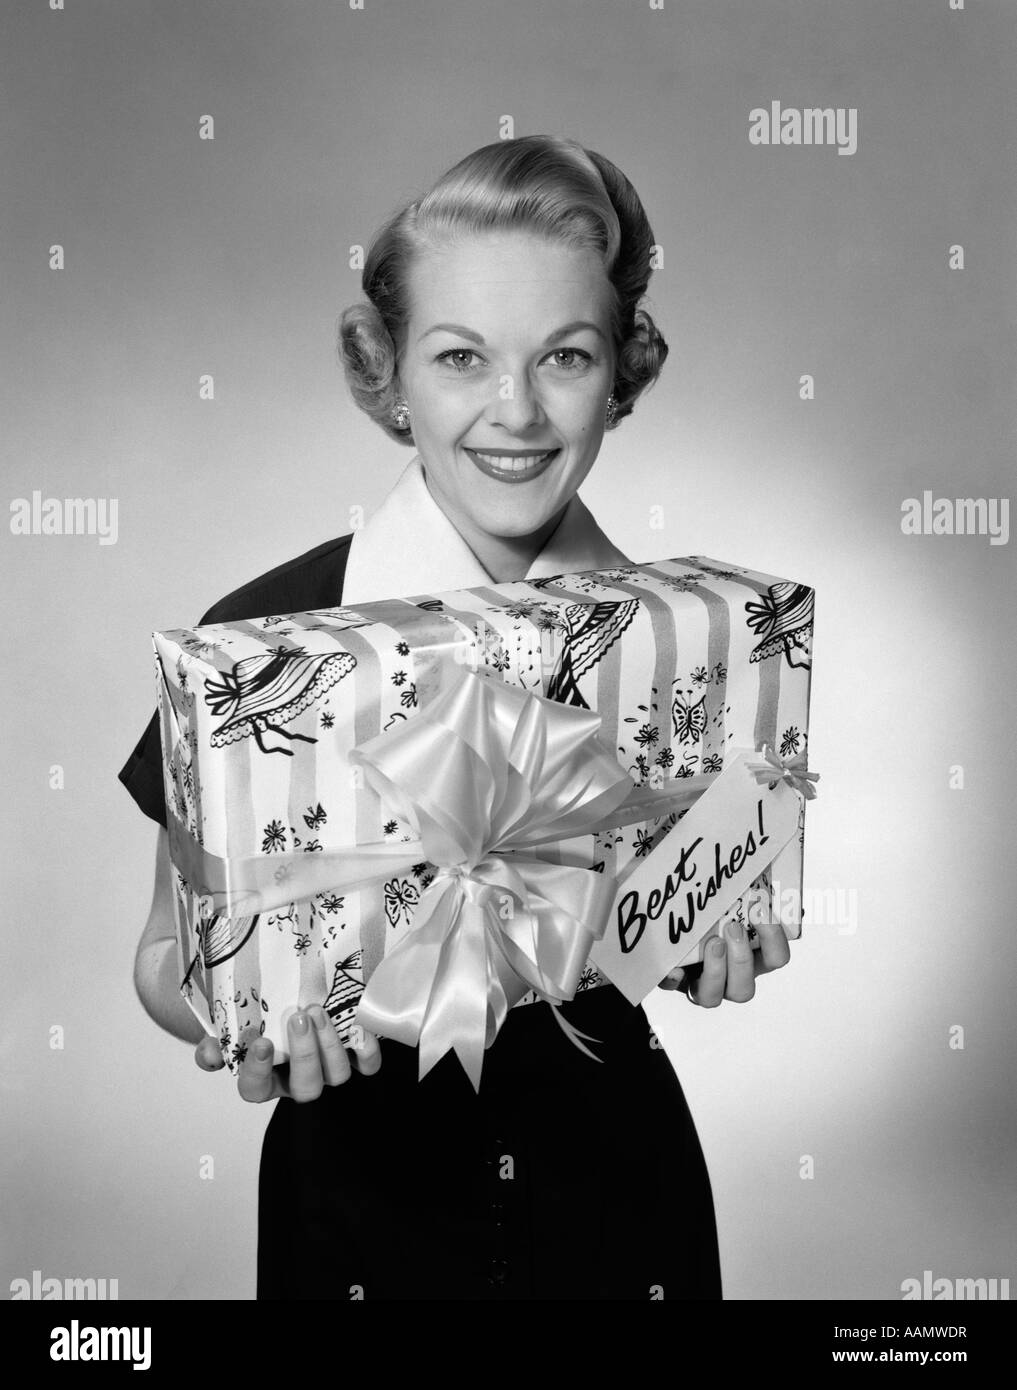 1950s WOMAN HOLDING WRAPPED PRESENT WITH BEST WISHES TAG LOOKING AT CAMERA Stock Photo